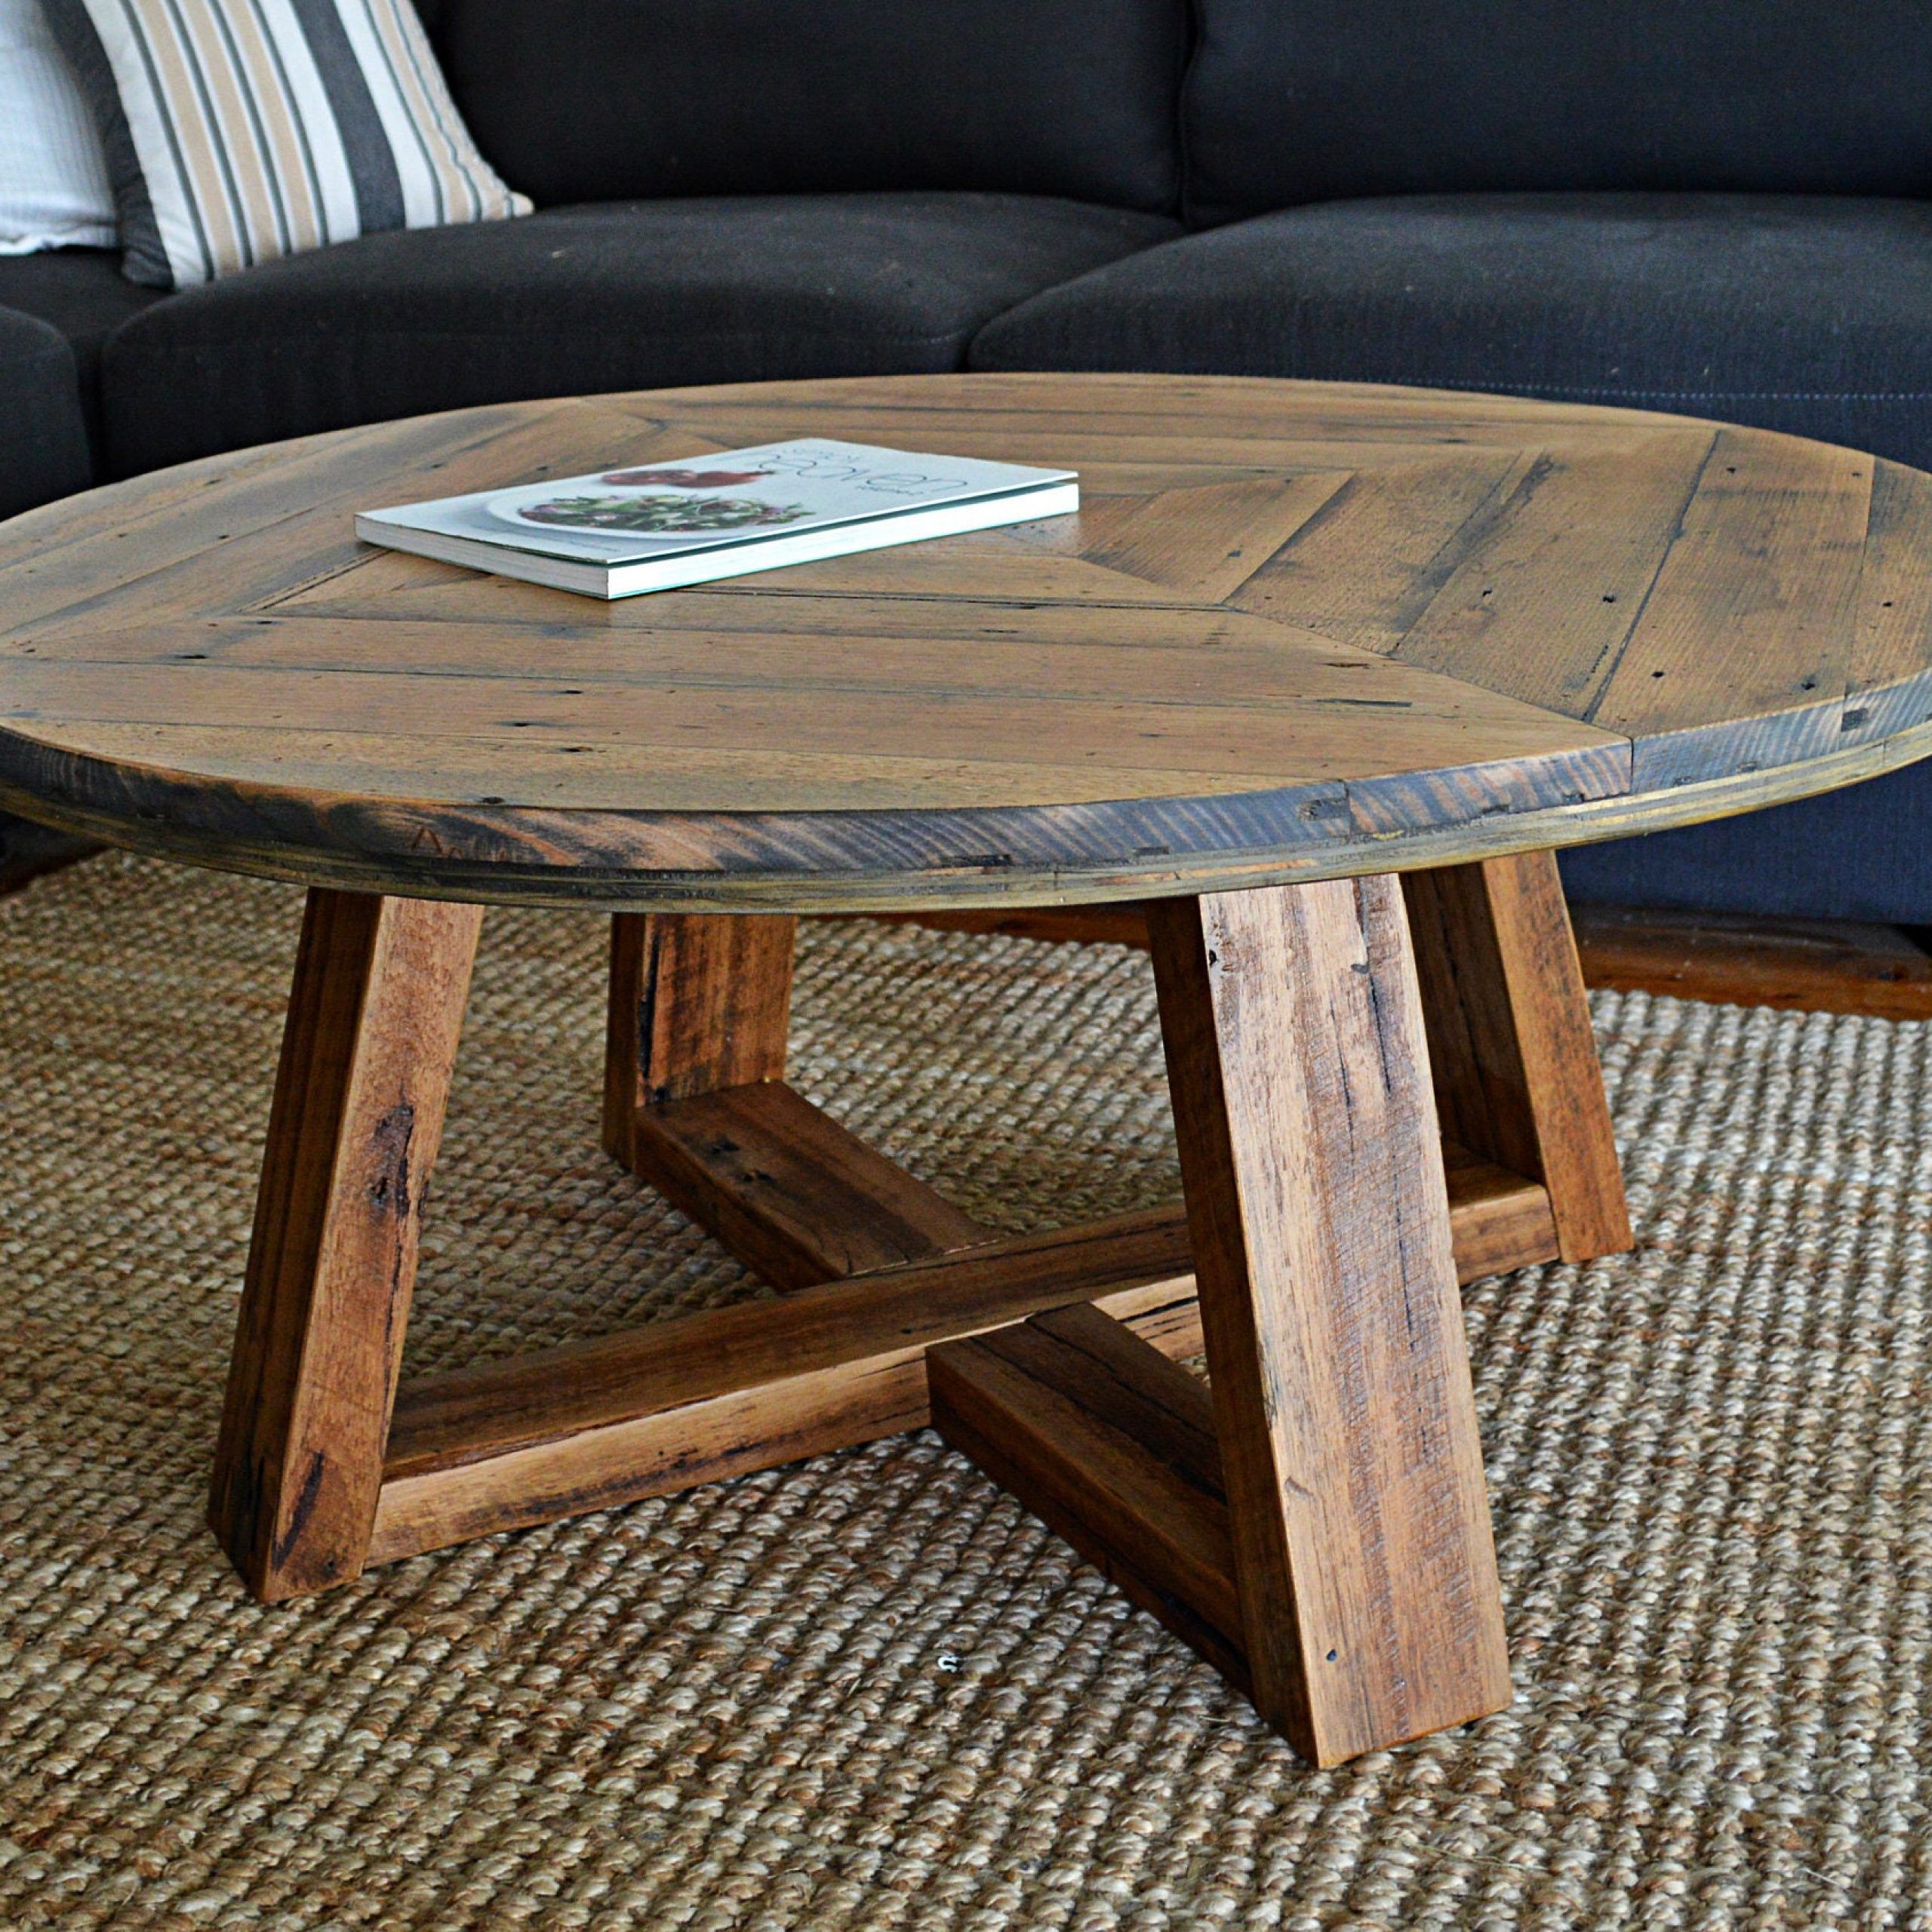 Round Recycled Timber Rustic Coffee Table / Geometric Table – Etsy Regarding Rustic Round Coffee Tables (View 14 of 15)